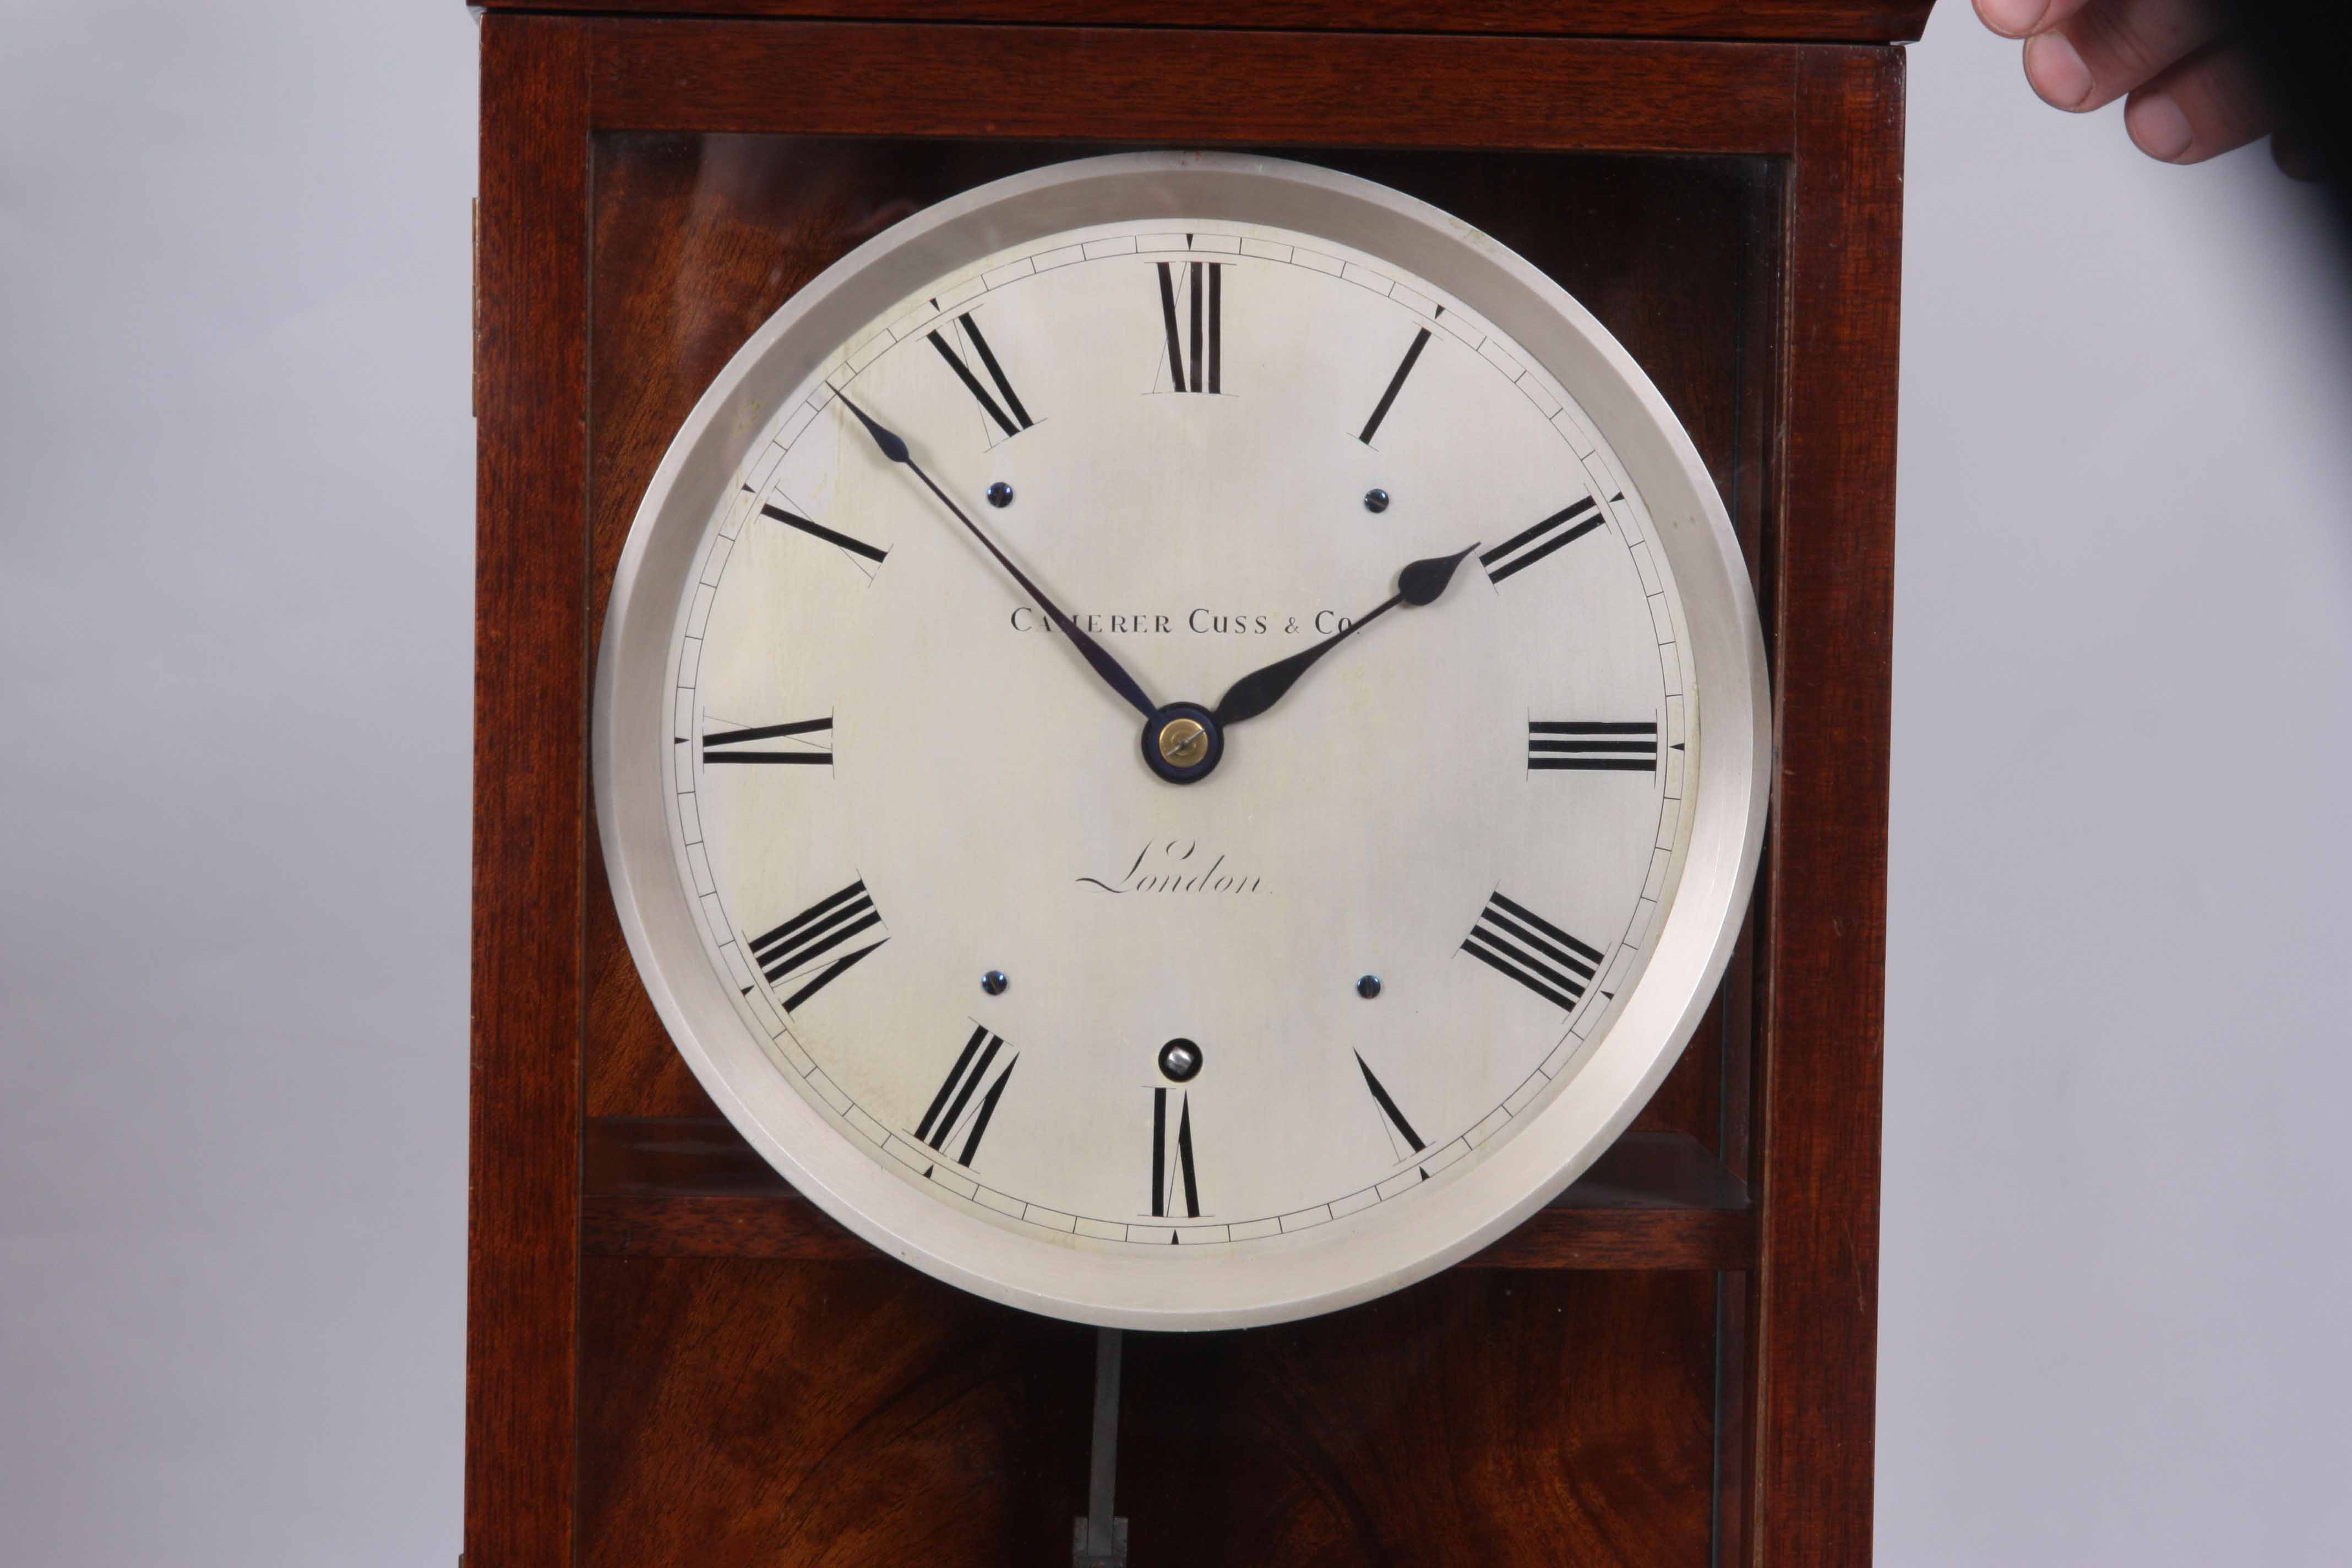 CAMERER CUSS & CO, LONDON A FINE EARLY 20TH CENTURY YEAR GOING REGULATOR WALL CLOCK the mahogany - Image 8 of 10